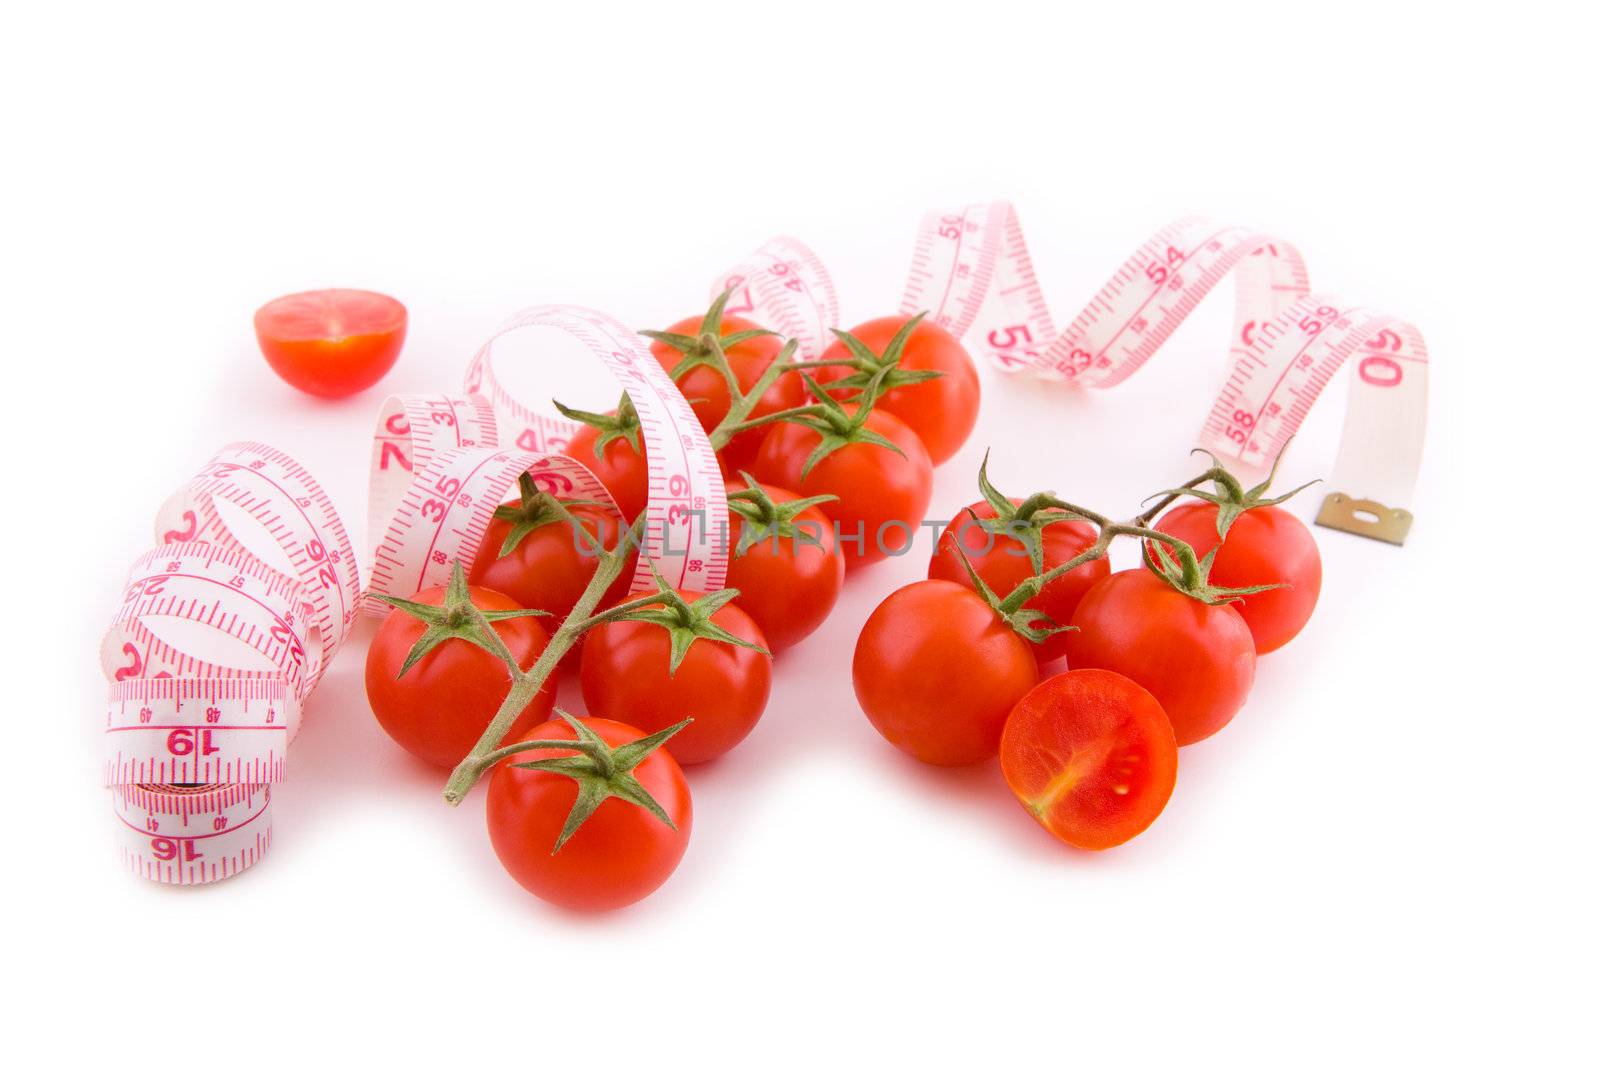 Small bunch of tomatoes with measure fitness tape on white